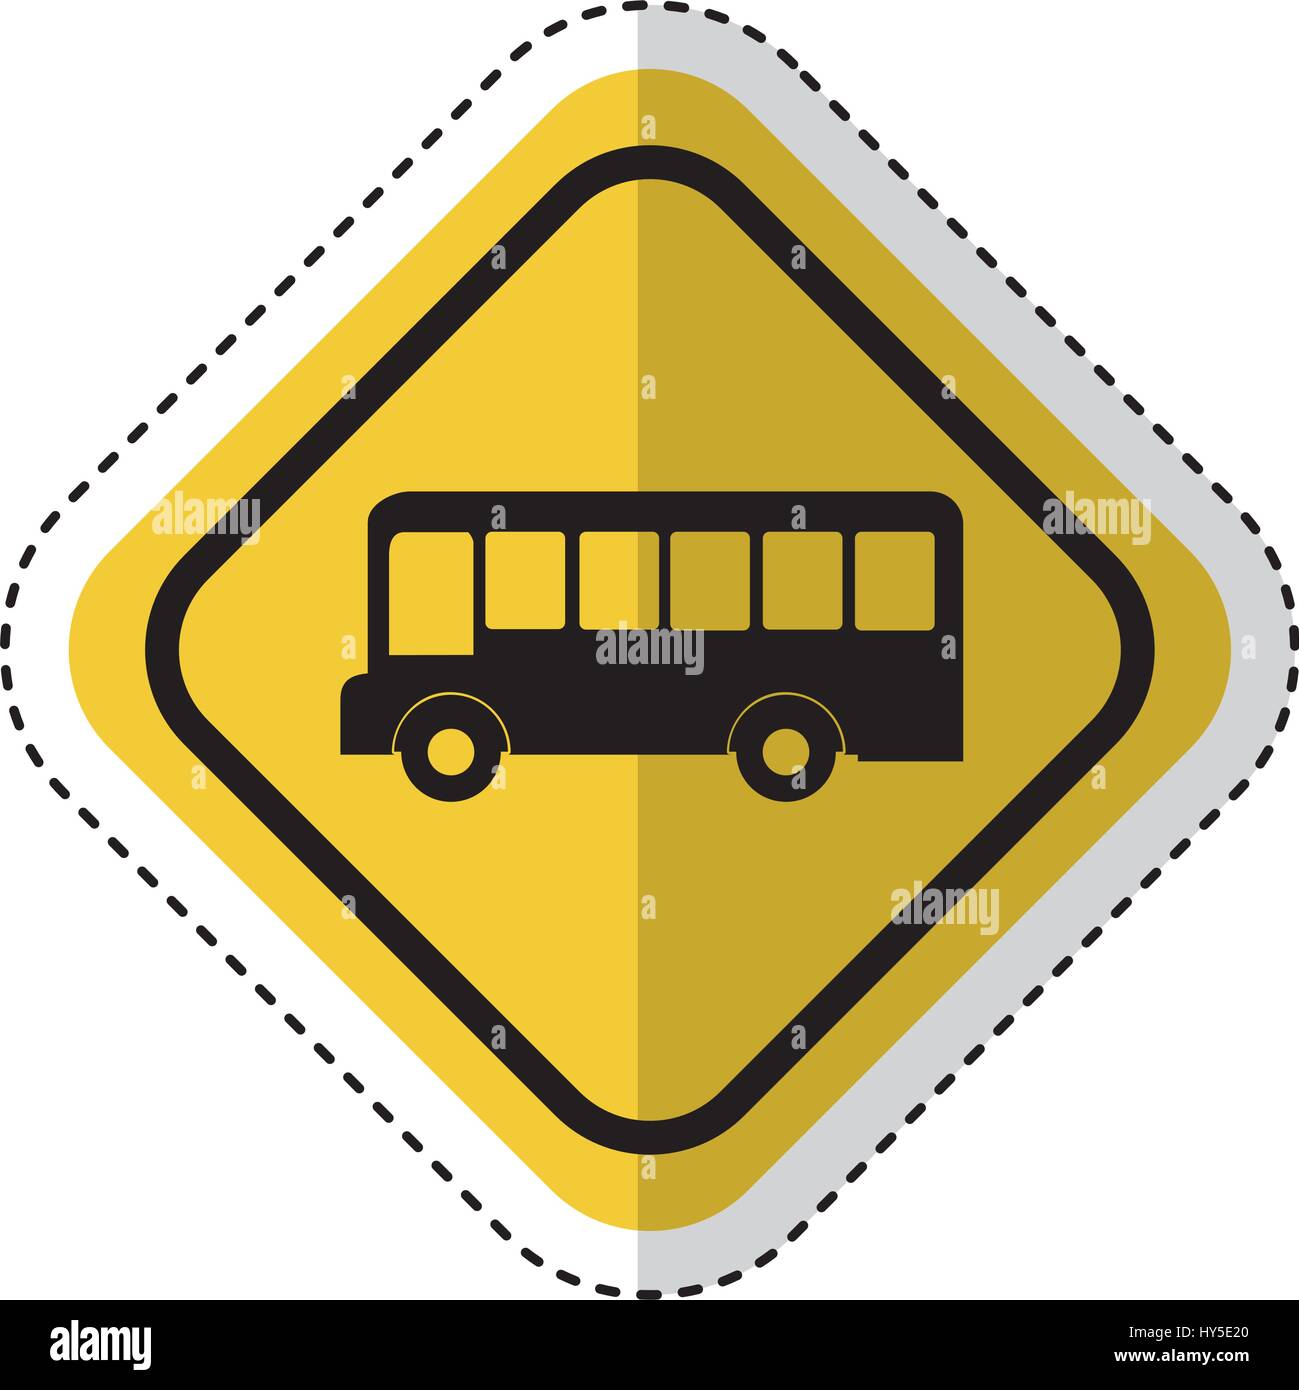 traffic signal bus vehicle isolated icon vector illustration design Stock Vector